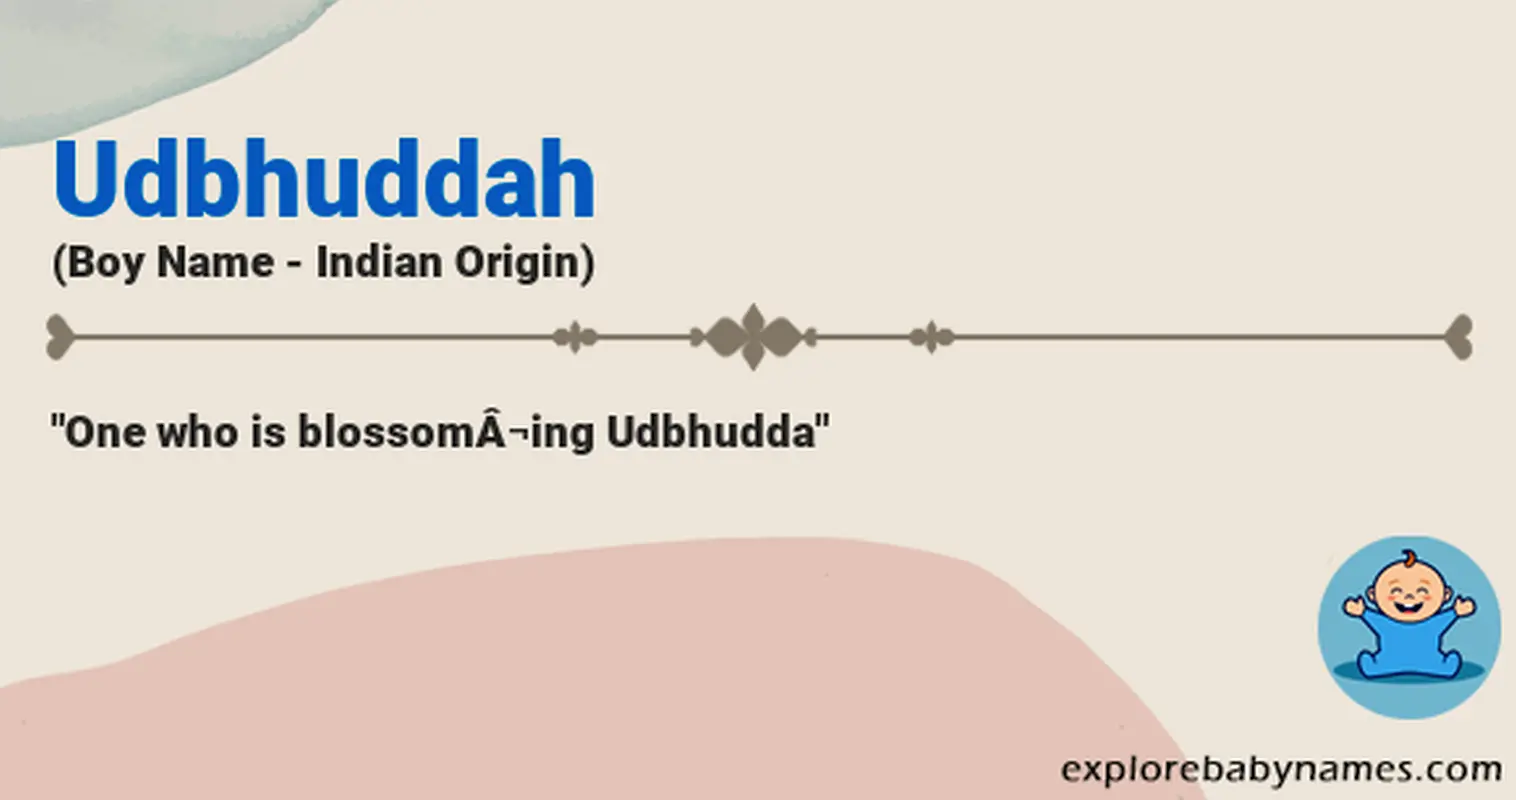 Meaning of Udbhuddah